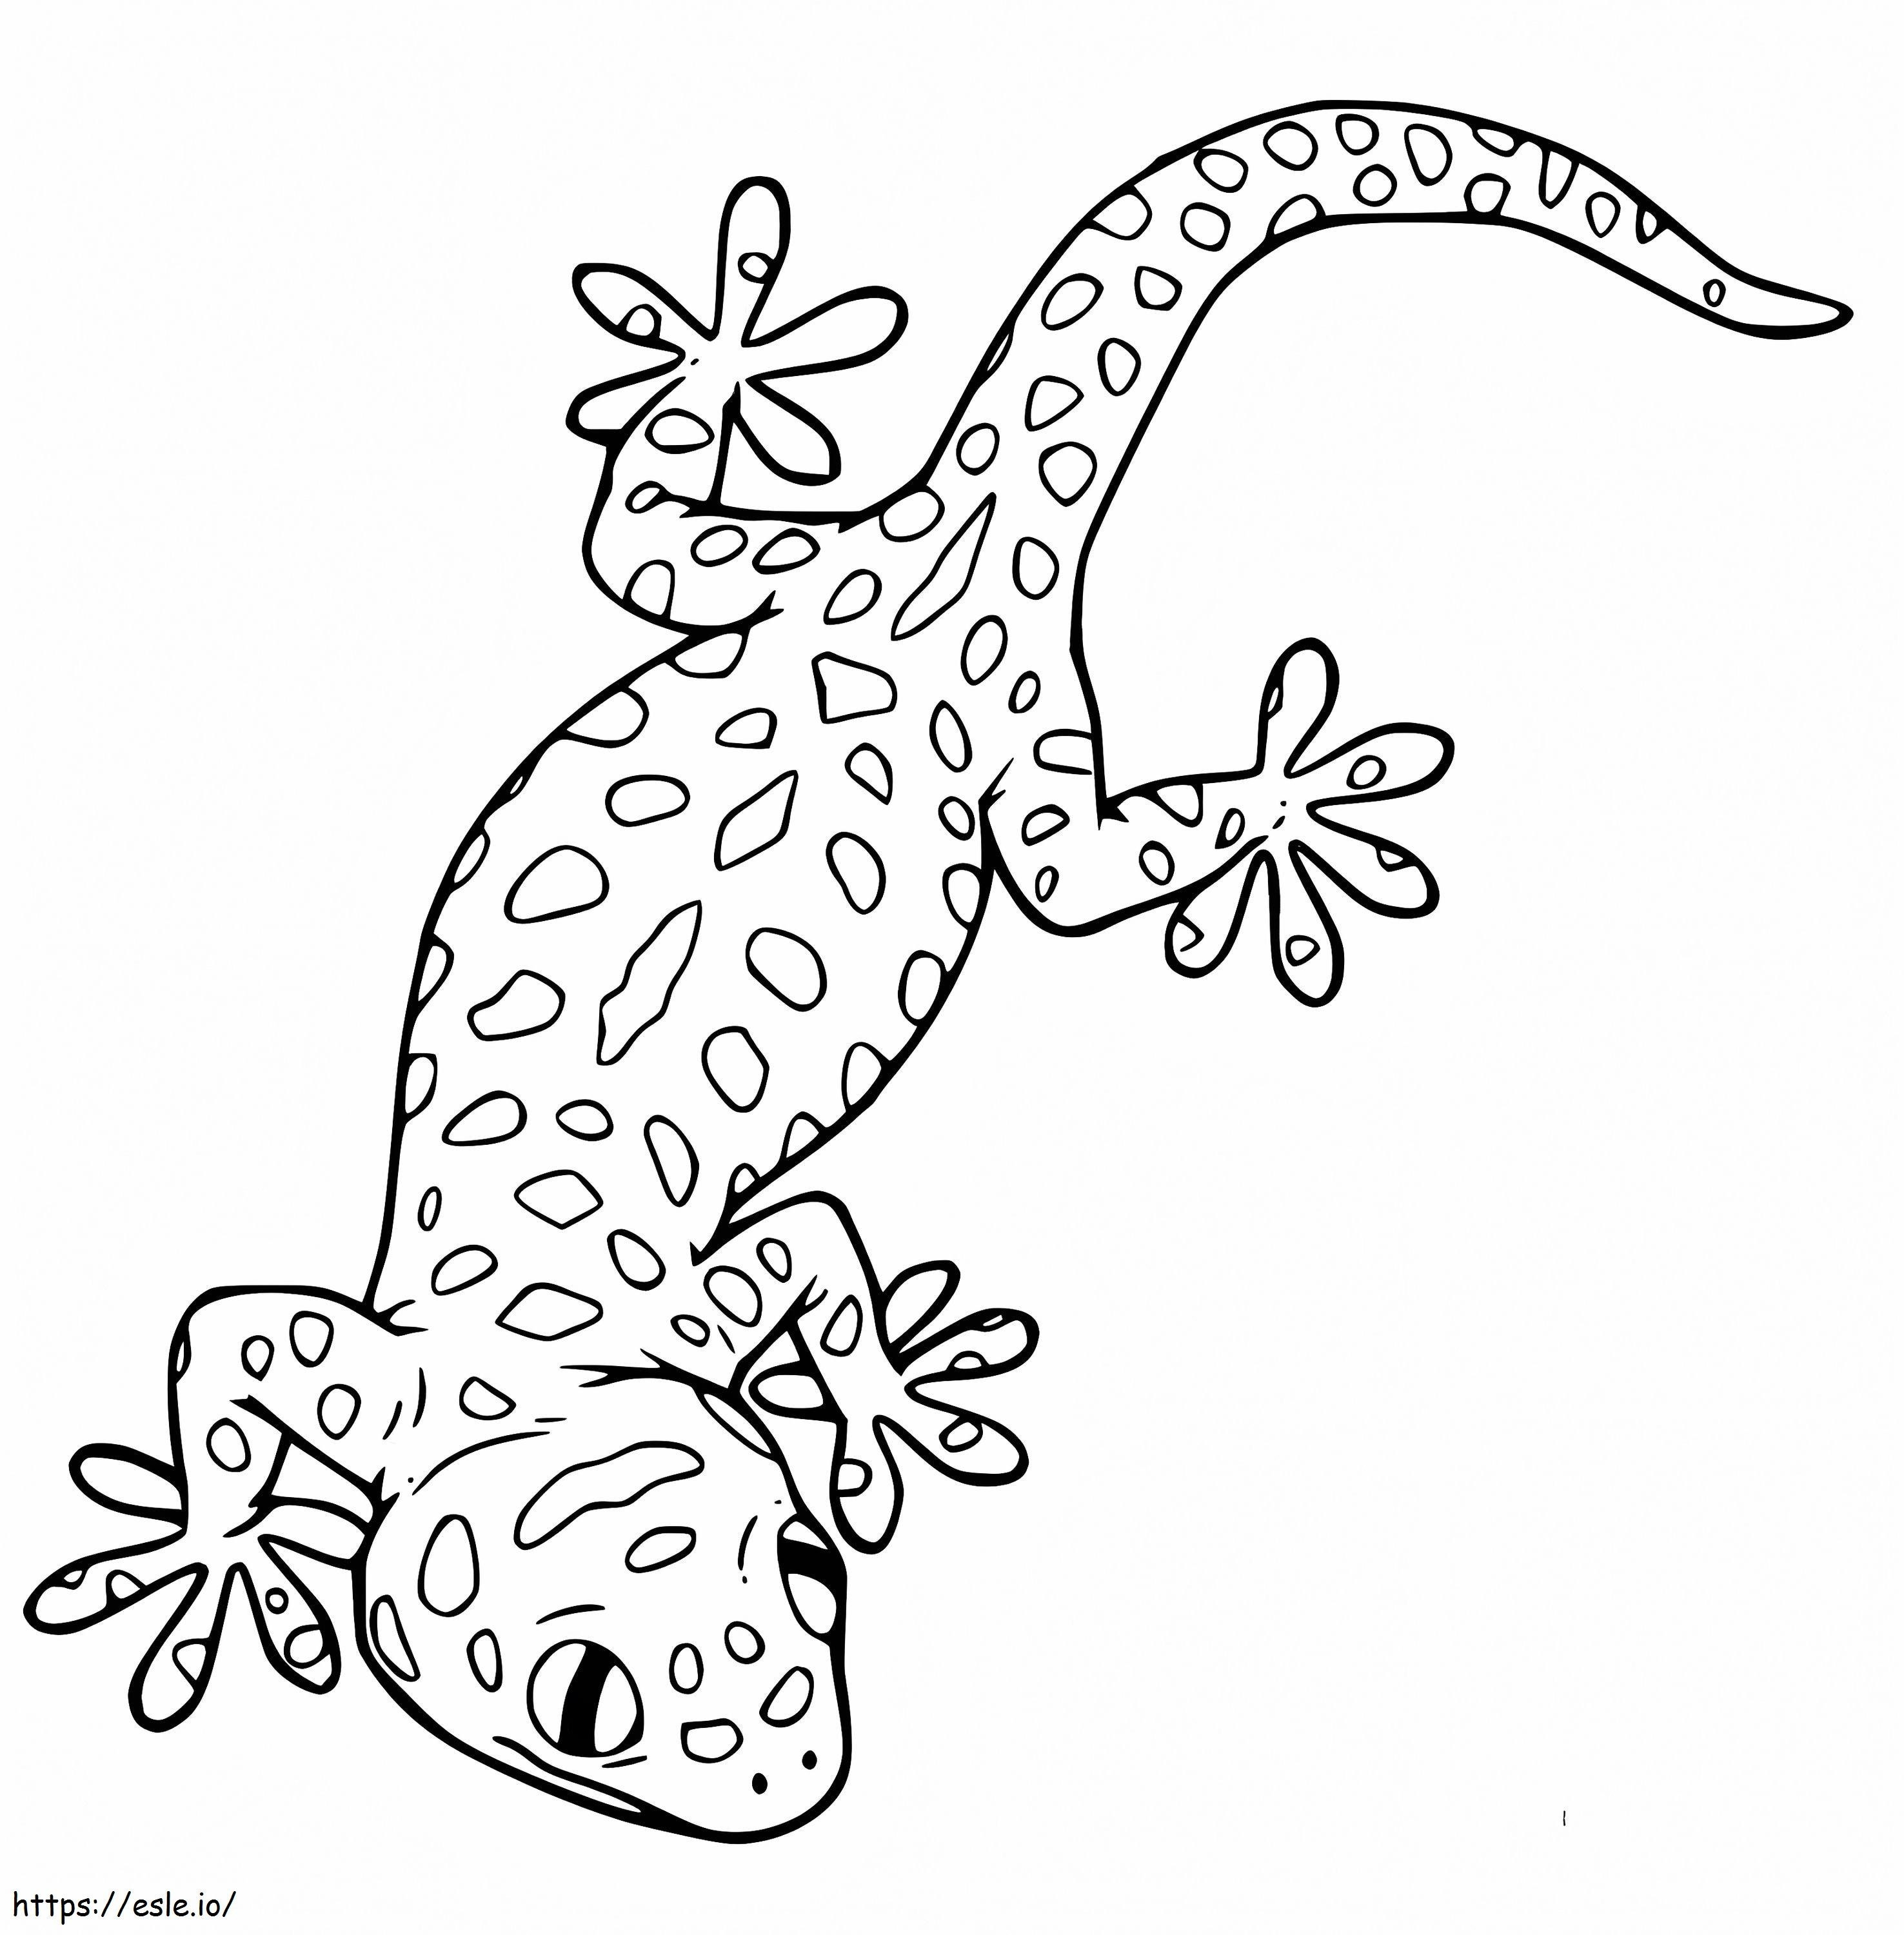 Leopard Gecko 3 coloring page